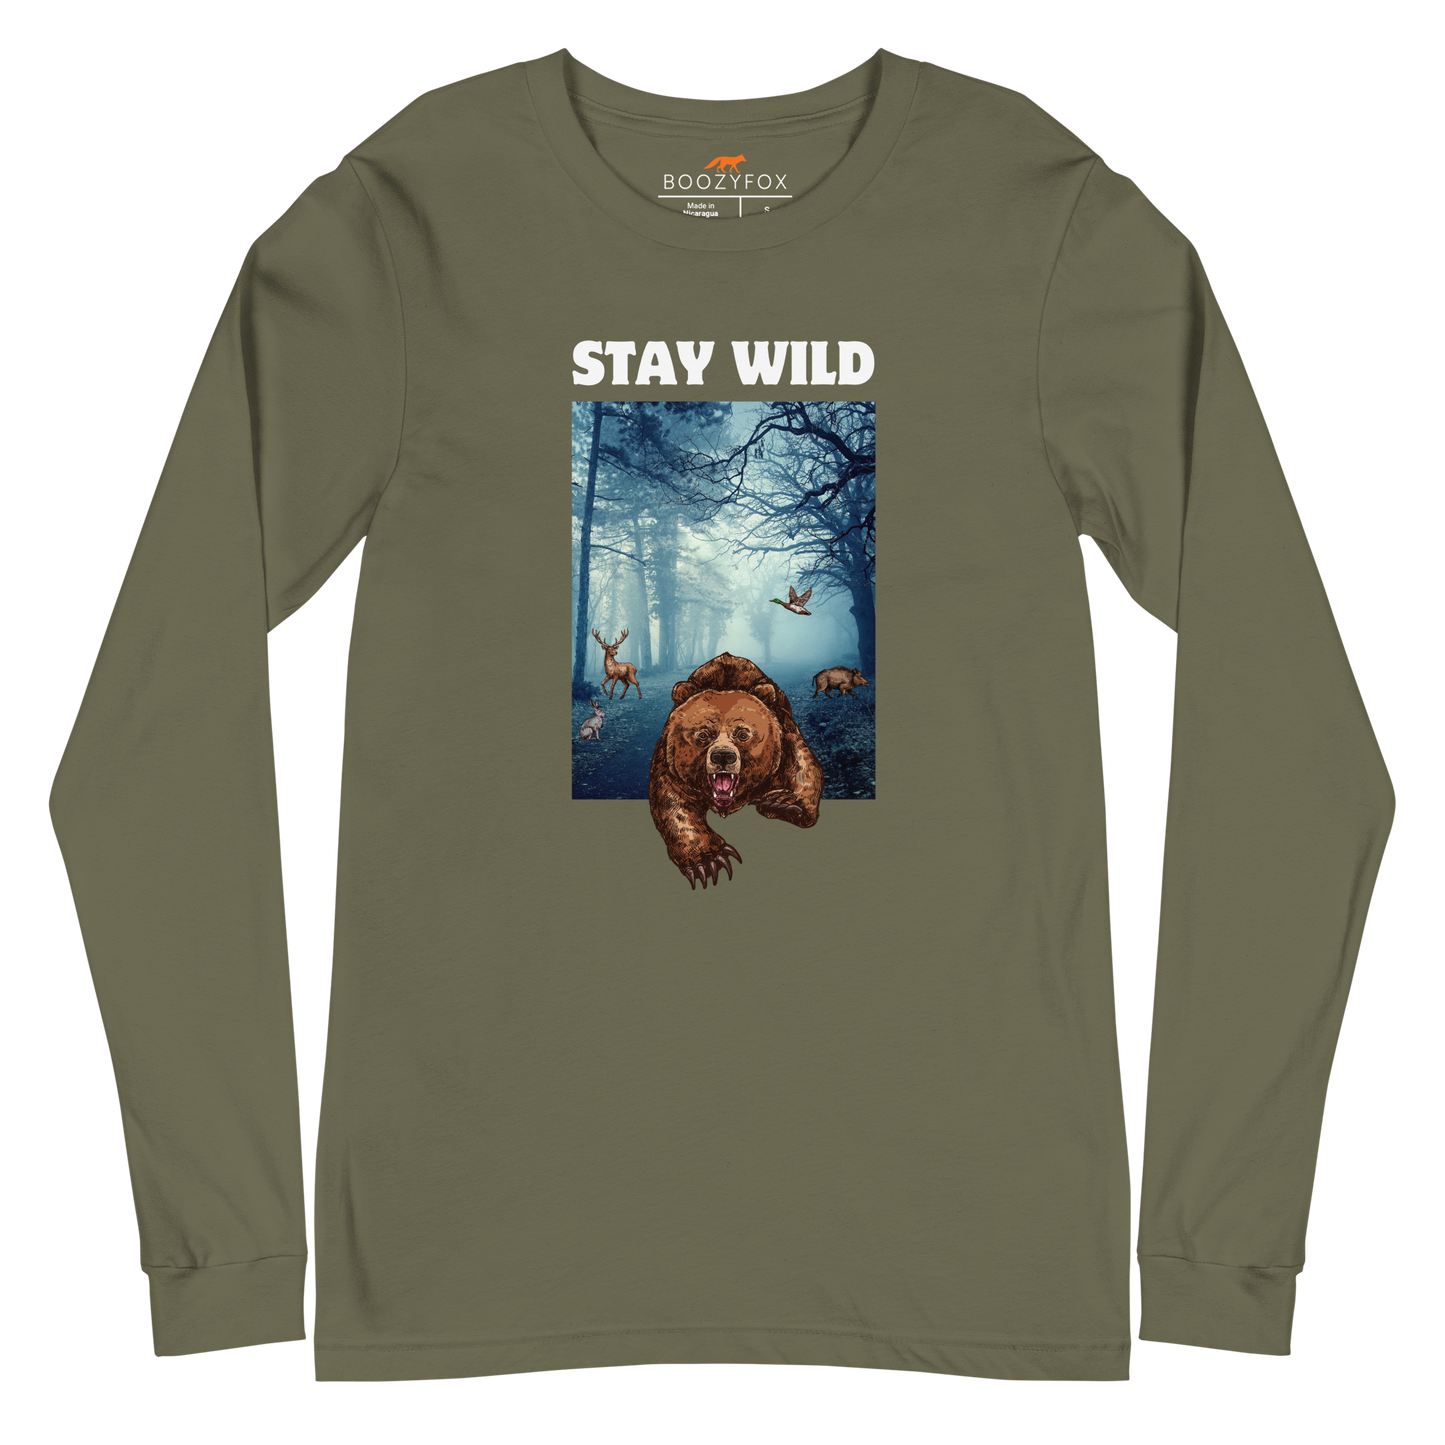 Military Green Bear Long Sleeve Tee featuring a Stay Wild graphic on the chest - Cool Bear Long Sleeve Graphic Tees - Boozy Fox